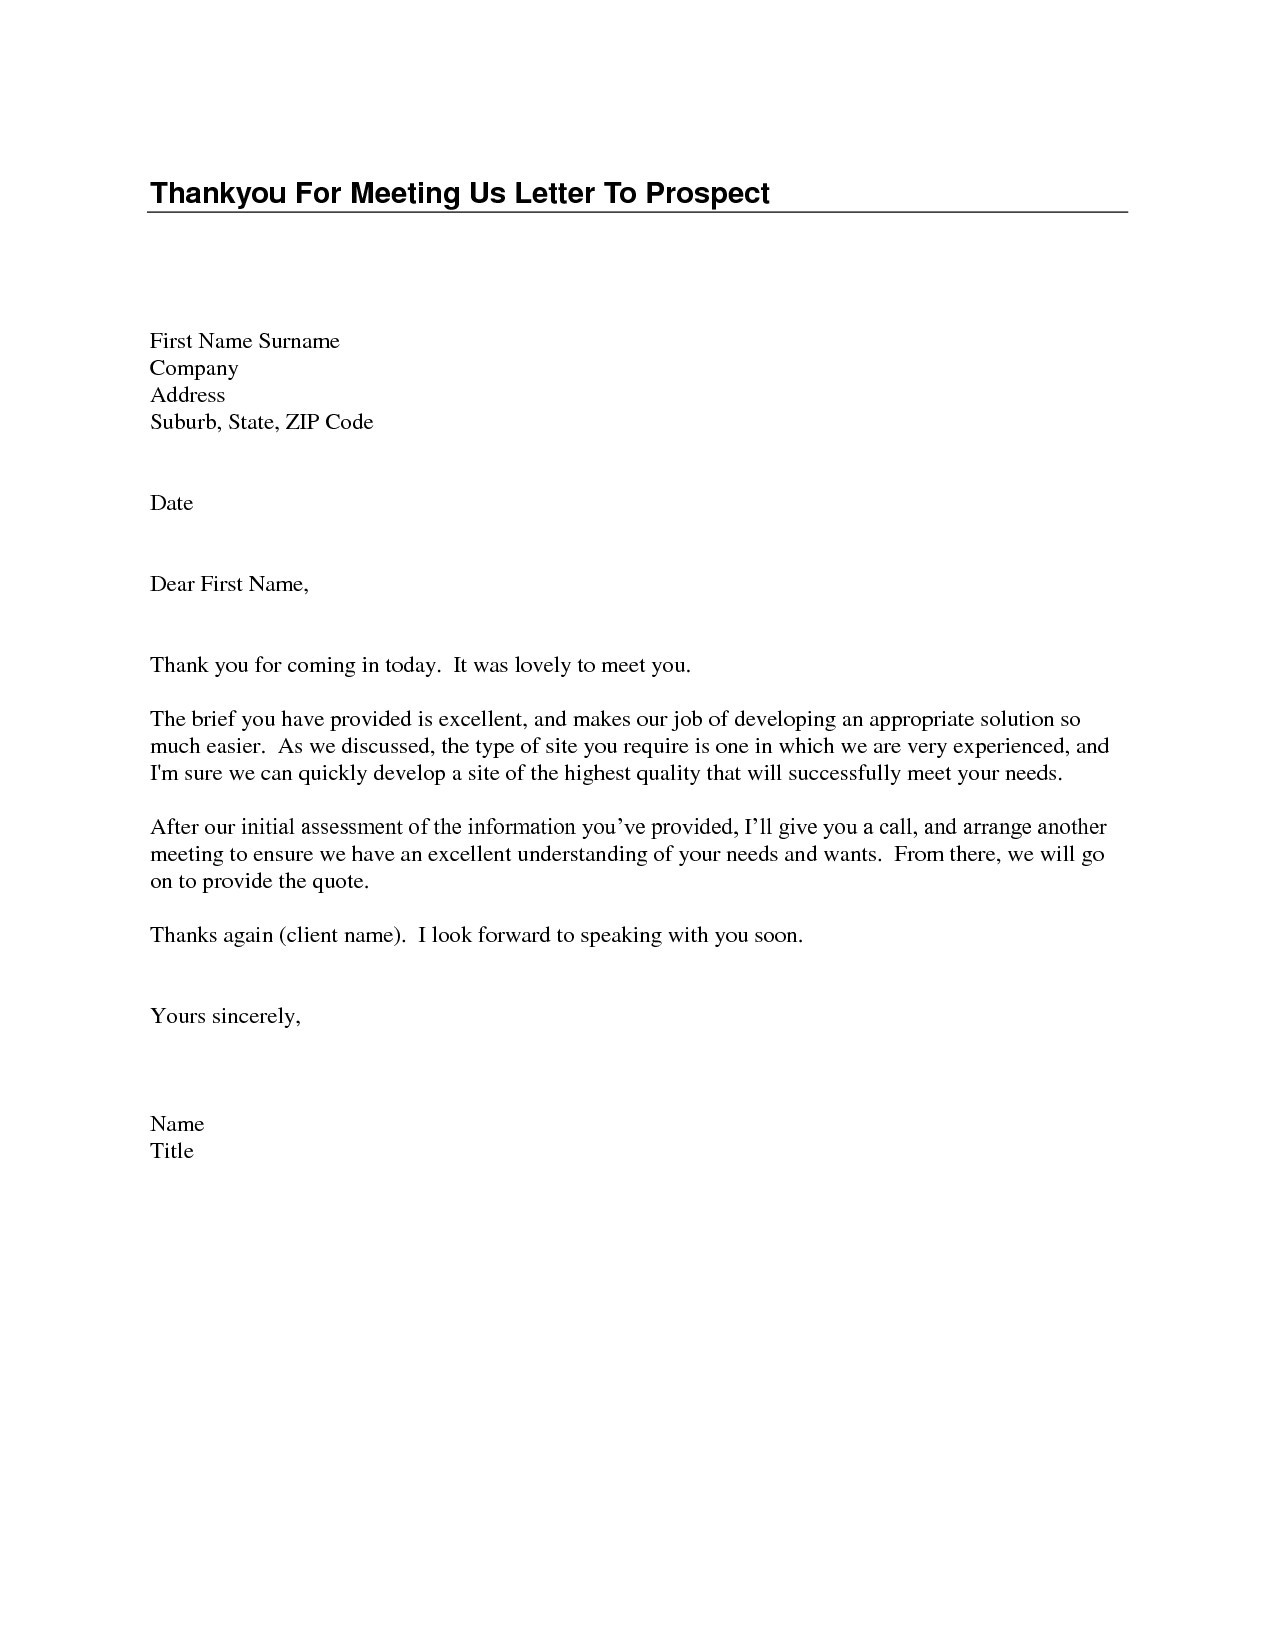 Thank You Letter After Meeting Potential Employer Archives Divansm Document Emails